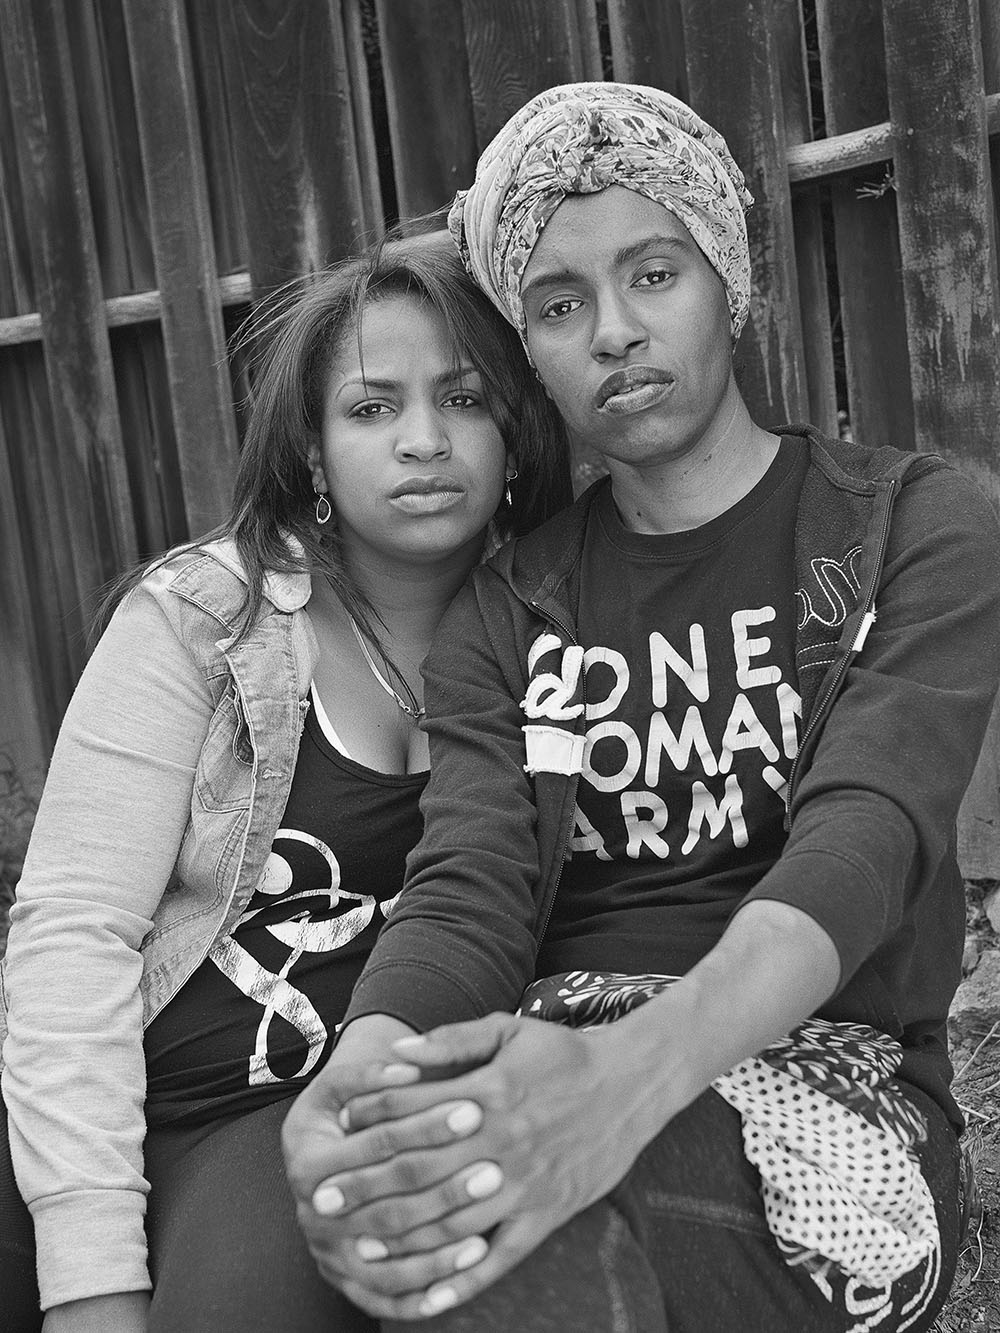 Shea with Her Best Friend, Amber Hasan, Shea’s Manager, Poet, Writer, Hip-Hop Artist, Actor, Comedian, Herbalist, Activist, Community Organizer, and Business Owner of Mama’s Helping Hands, Flint, Michigan I, 2016-2017. ©2022 LaToya Ruby Frazier. Courtesy of the artist and Gladstone Gallery.